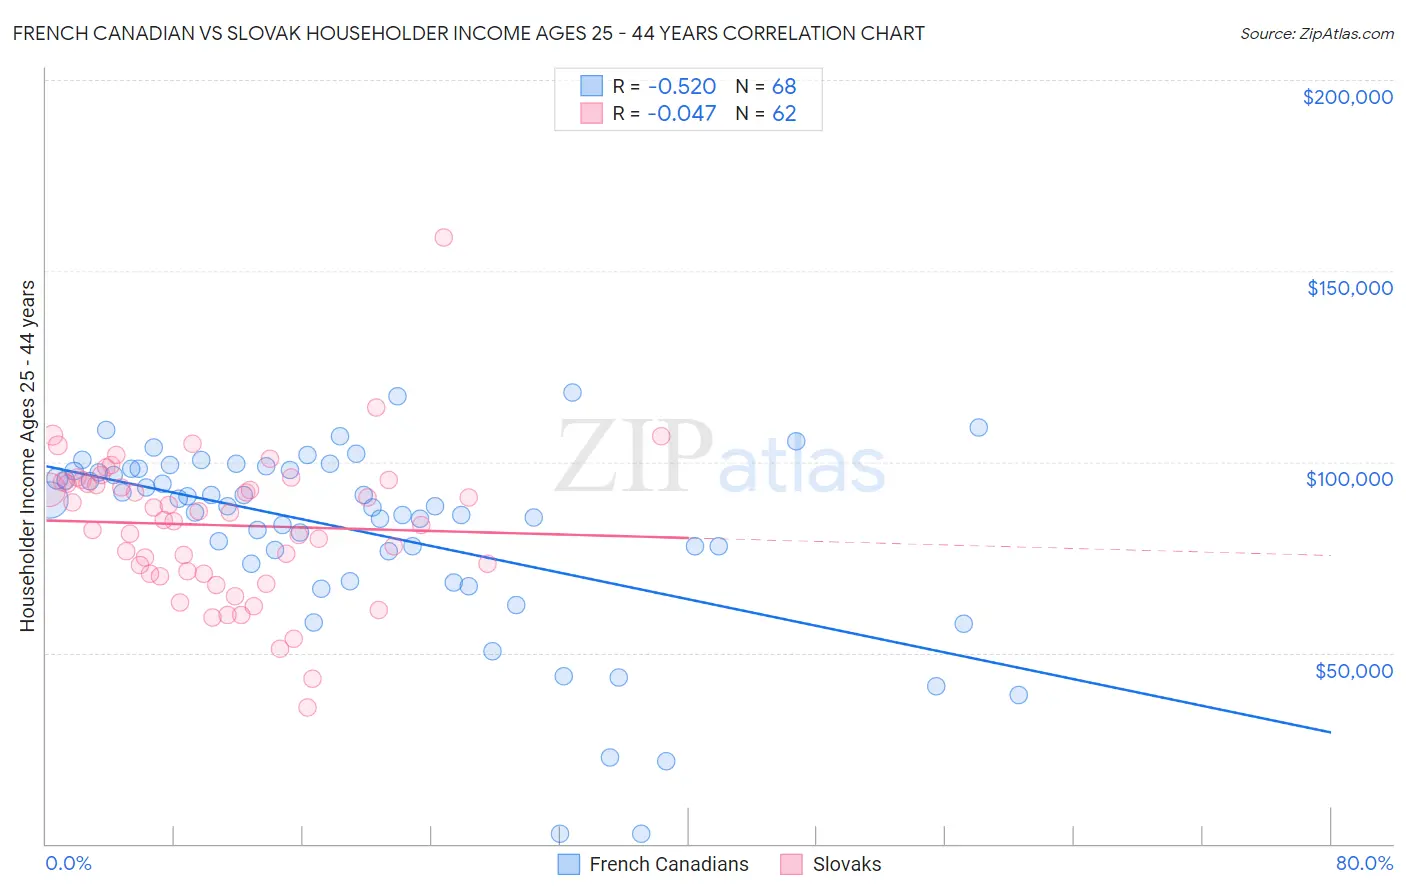 French Canadian vs Slovak Householder Income Ages 25 - 44 years